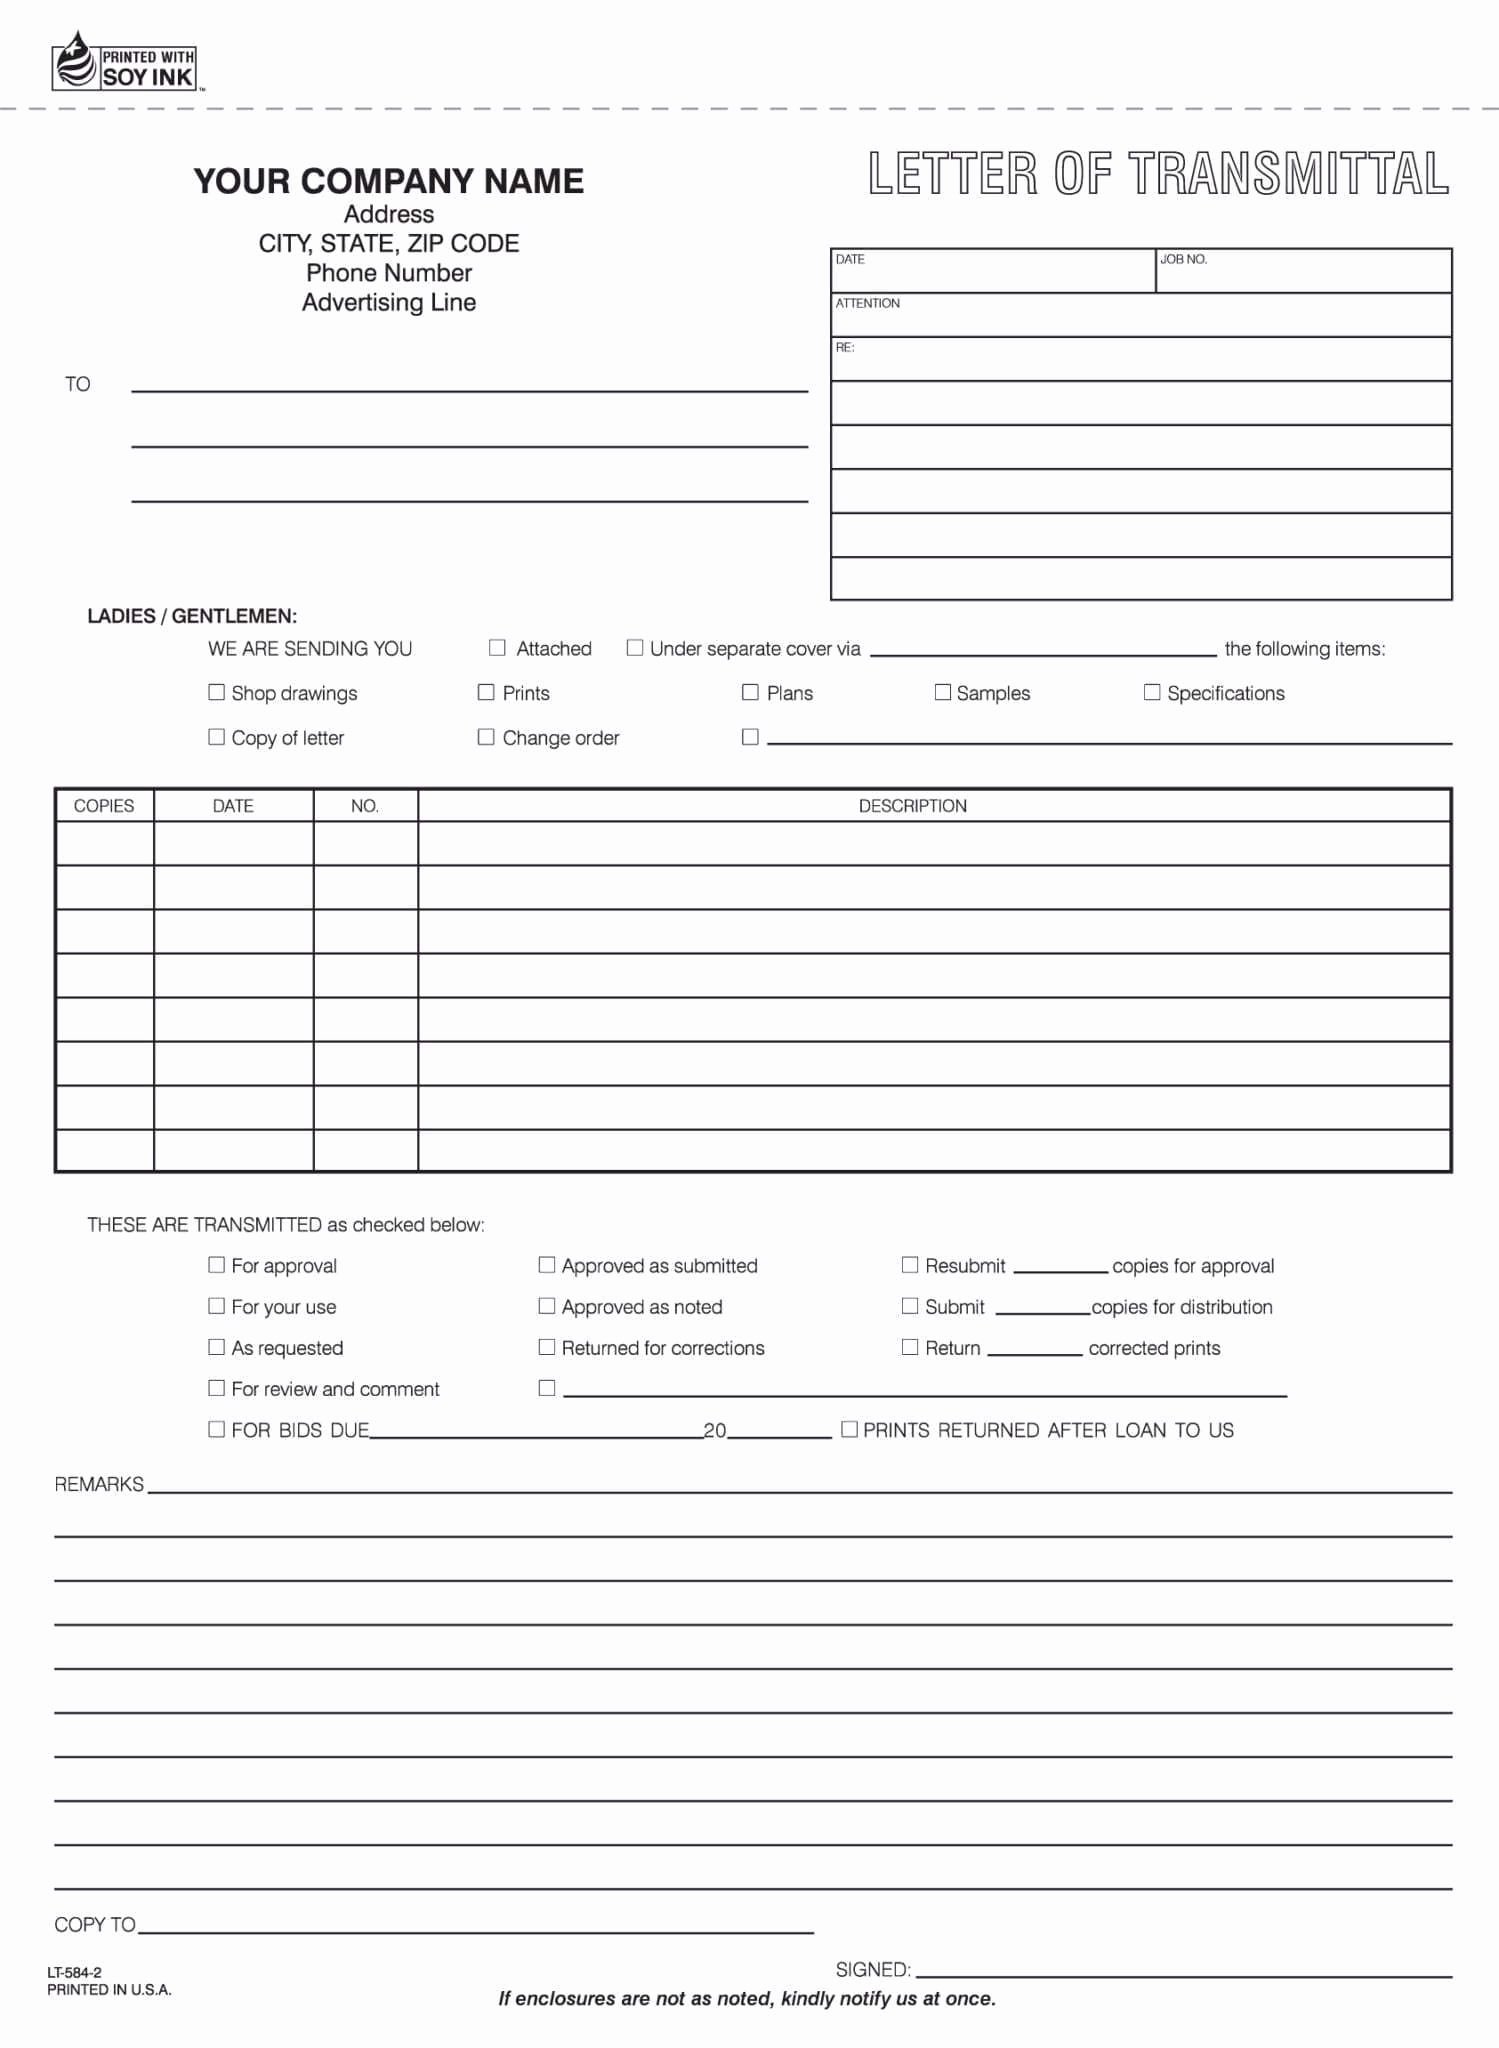 Document Transmittal form Template Lovely 2 Part Contractor Service Letter Of Transmittal form